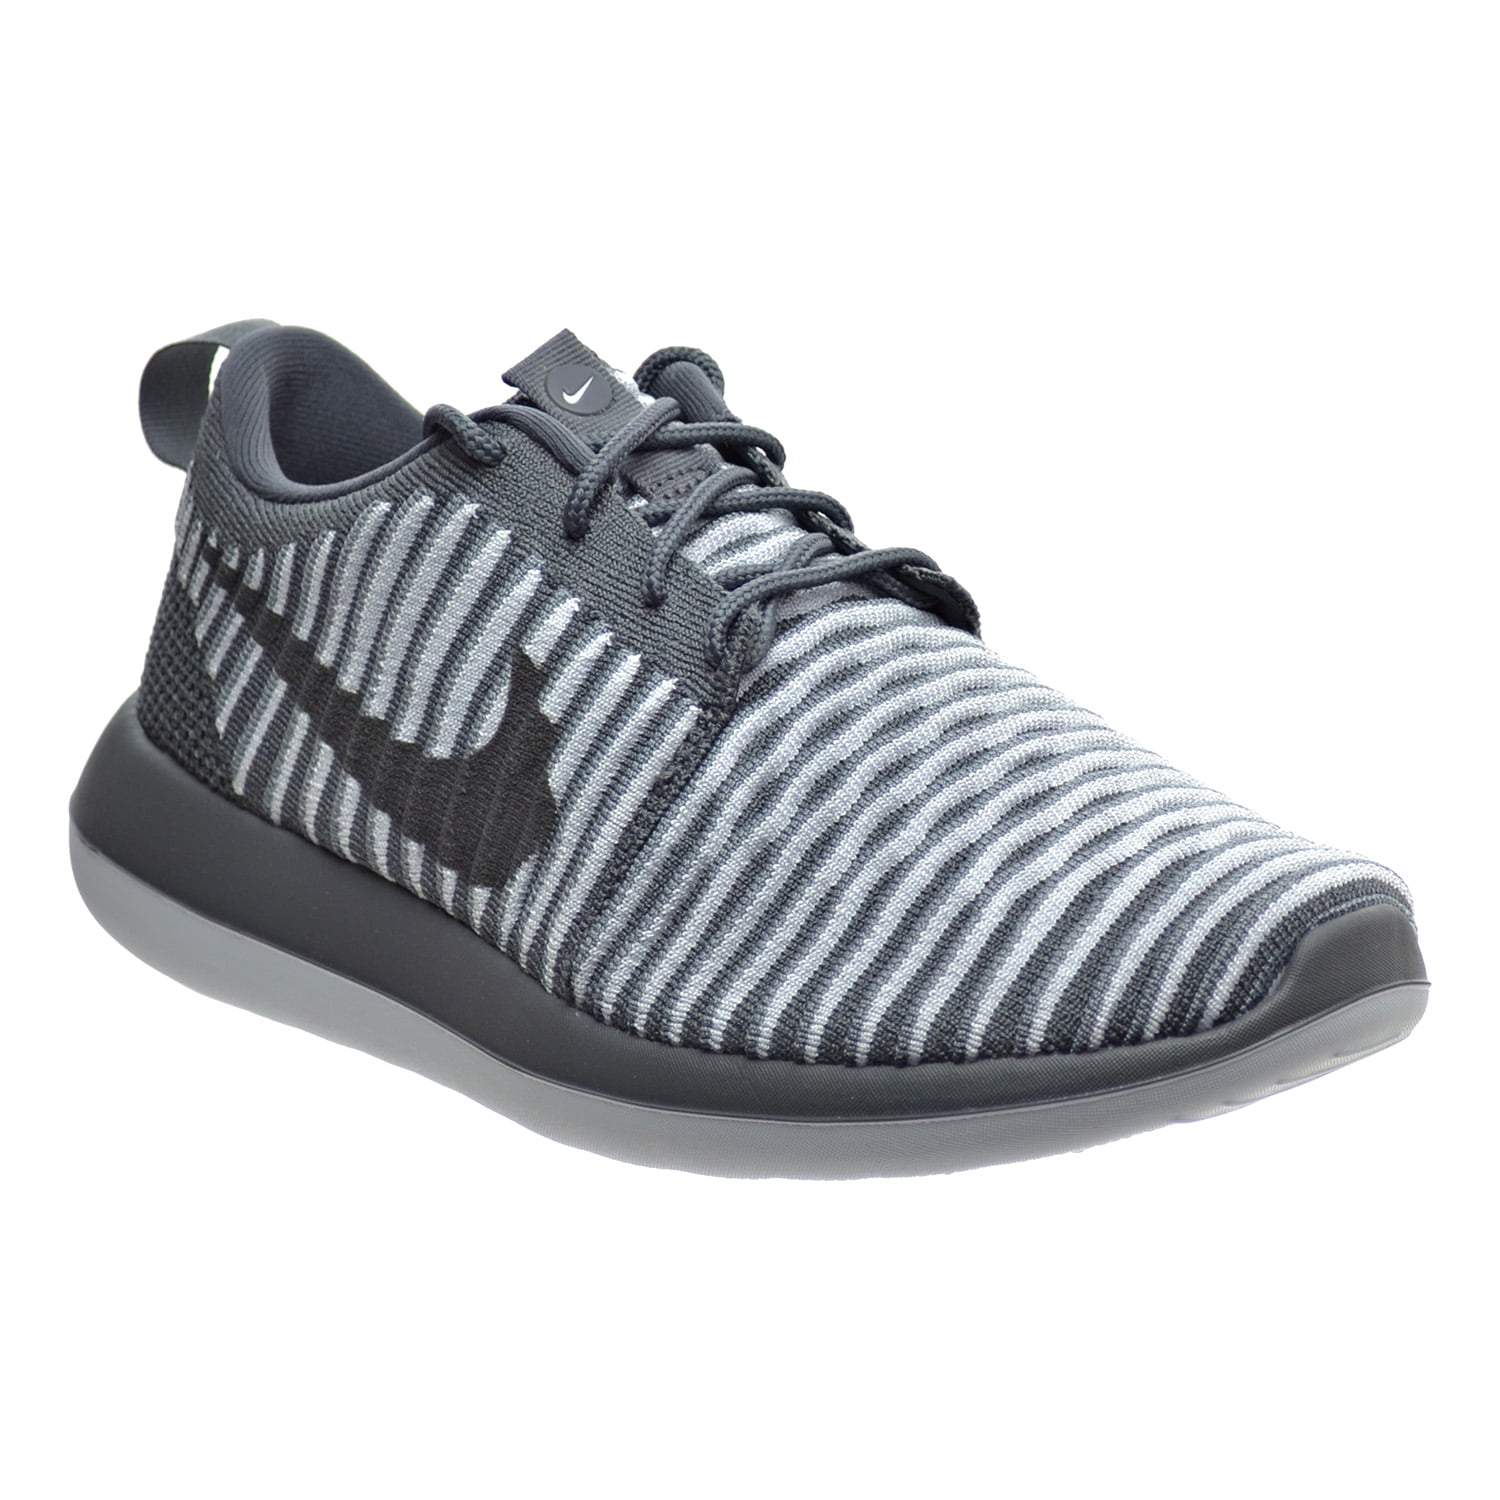 Nike Roshe Two Flyknit Womens Shoes Dark Grey-Pure Platinum 844929-002 -